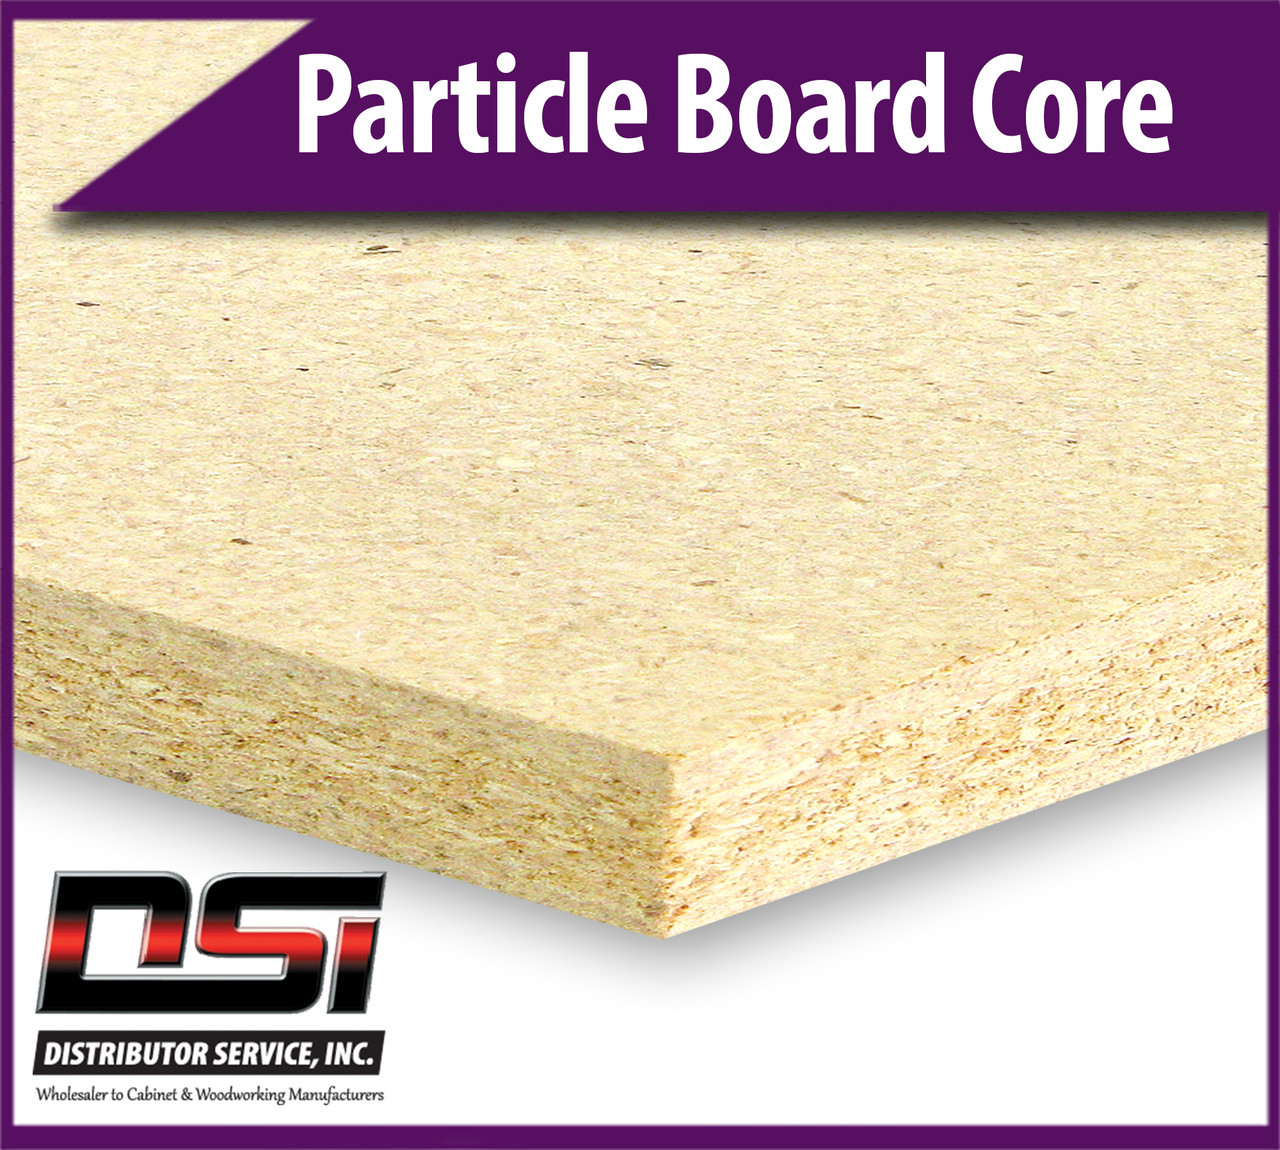 Particle Board Core 3/8" x 49" x 97" Industrial Particleboard Panels